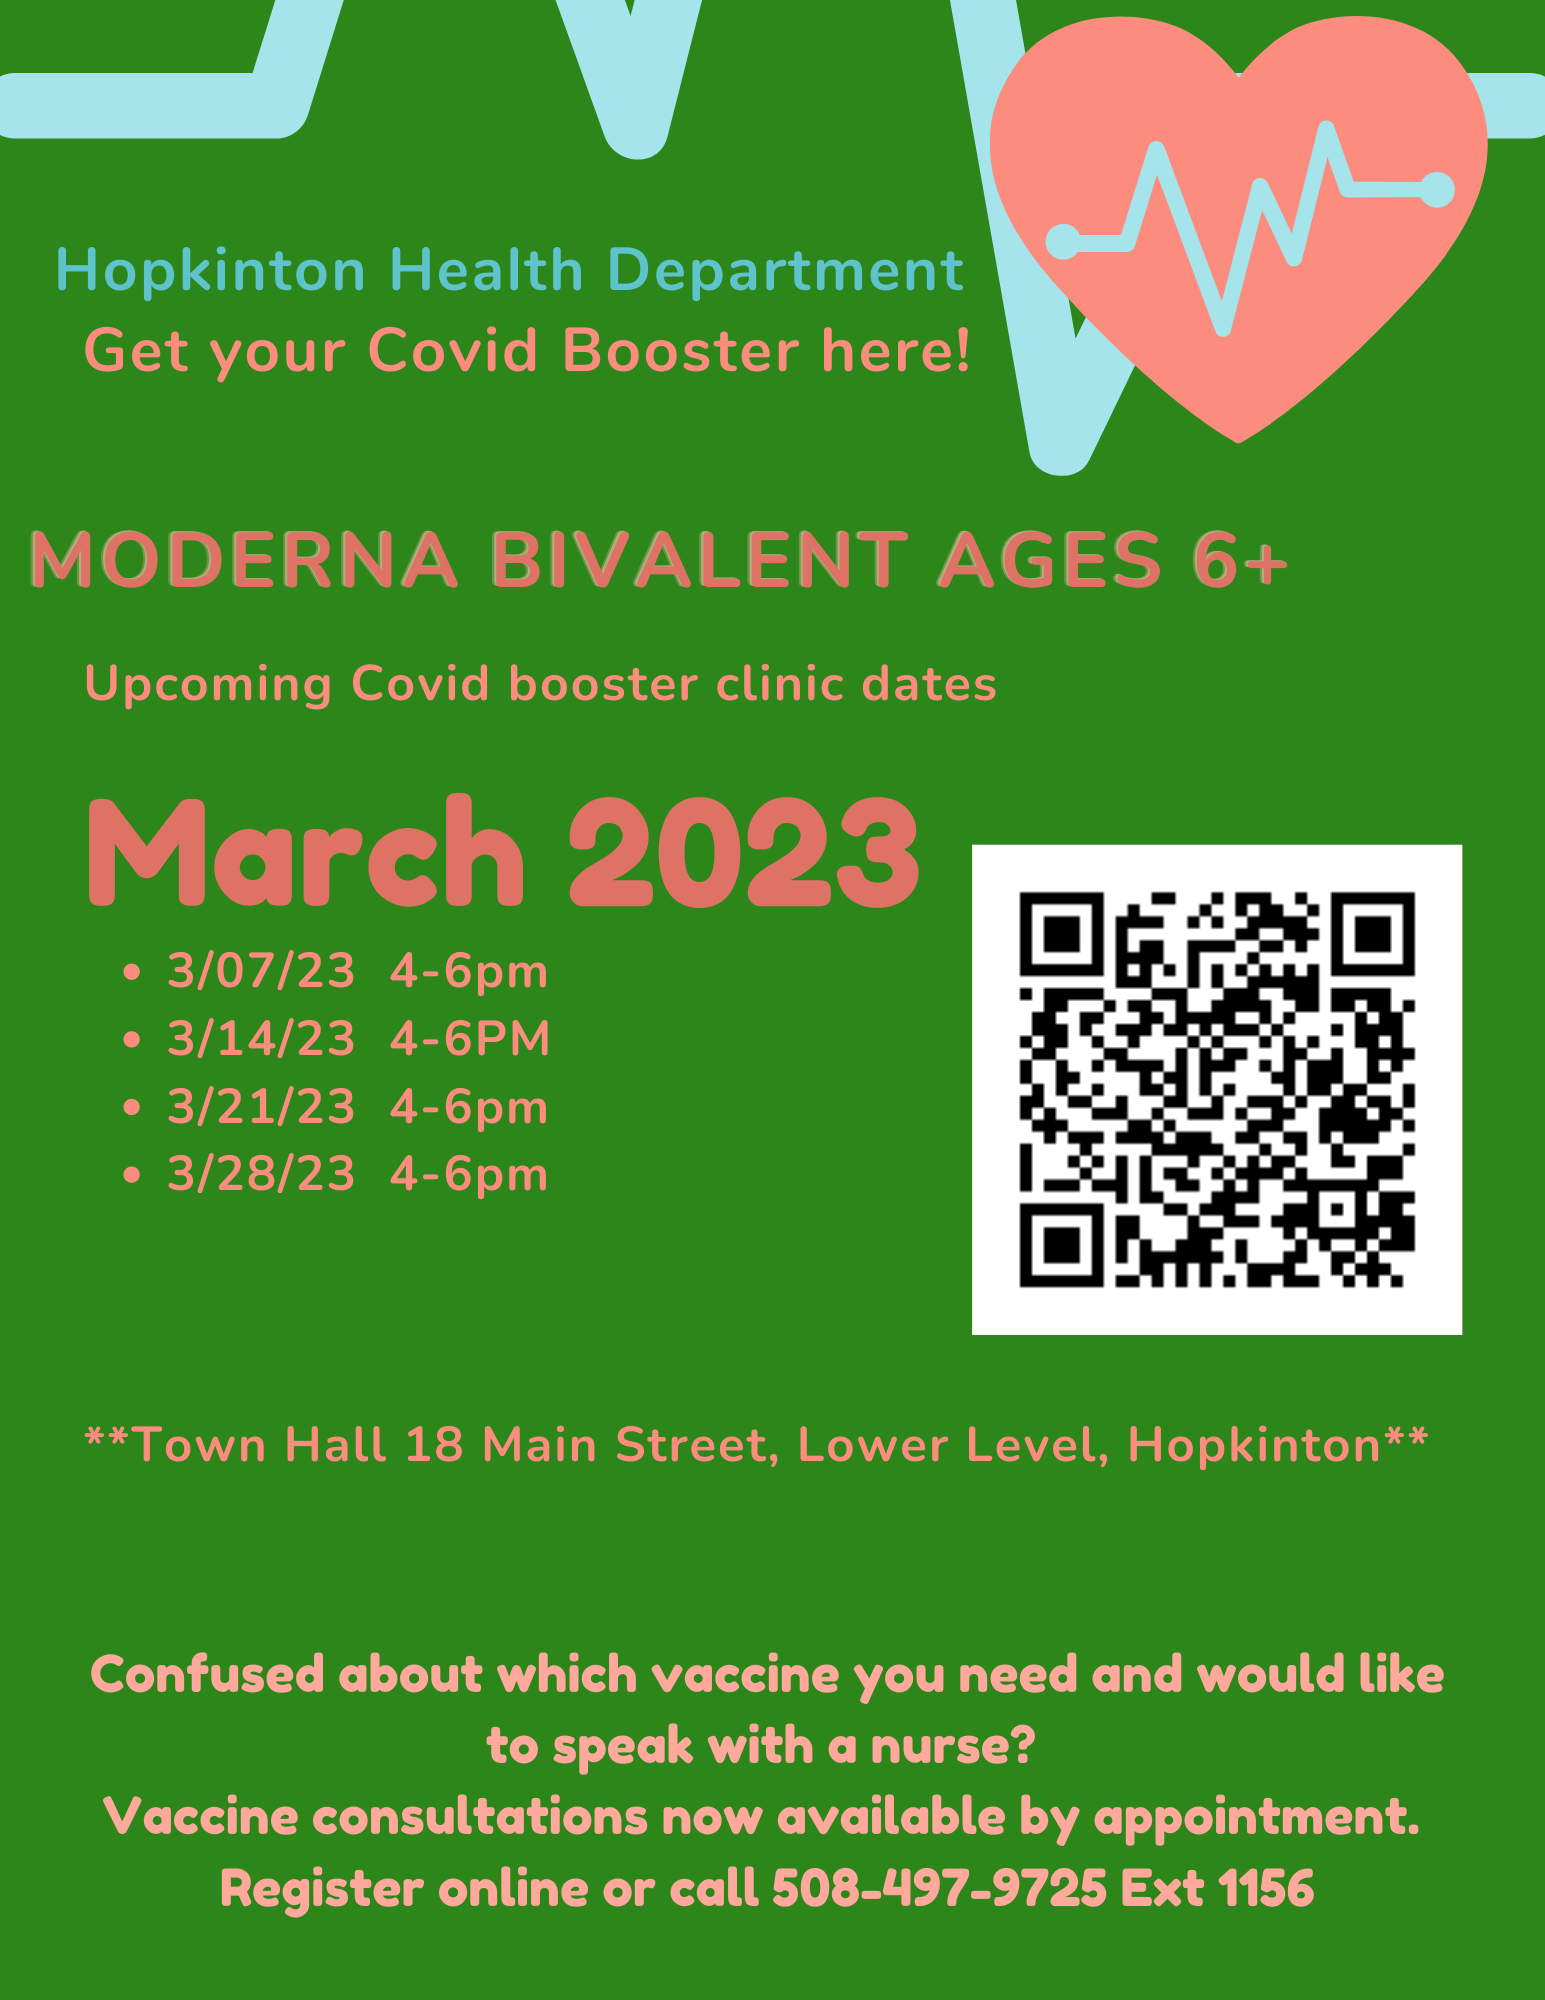 Health Department hosts COVID booster clinics in March